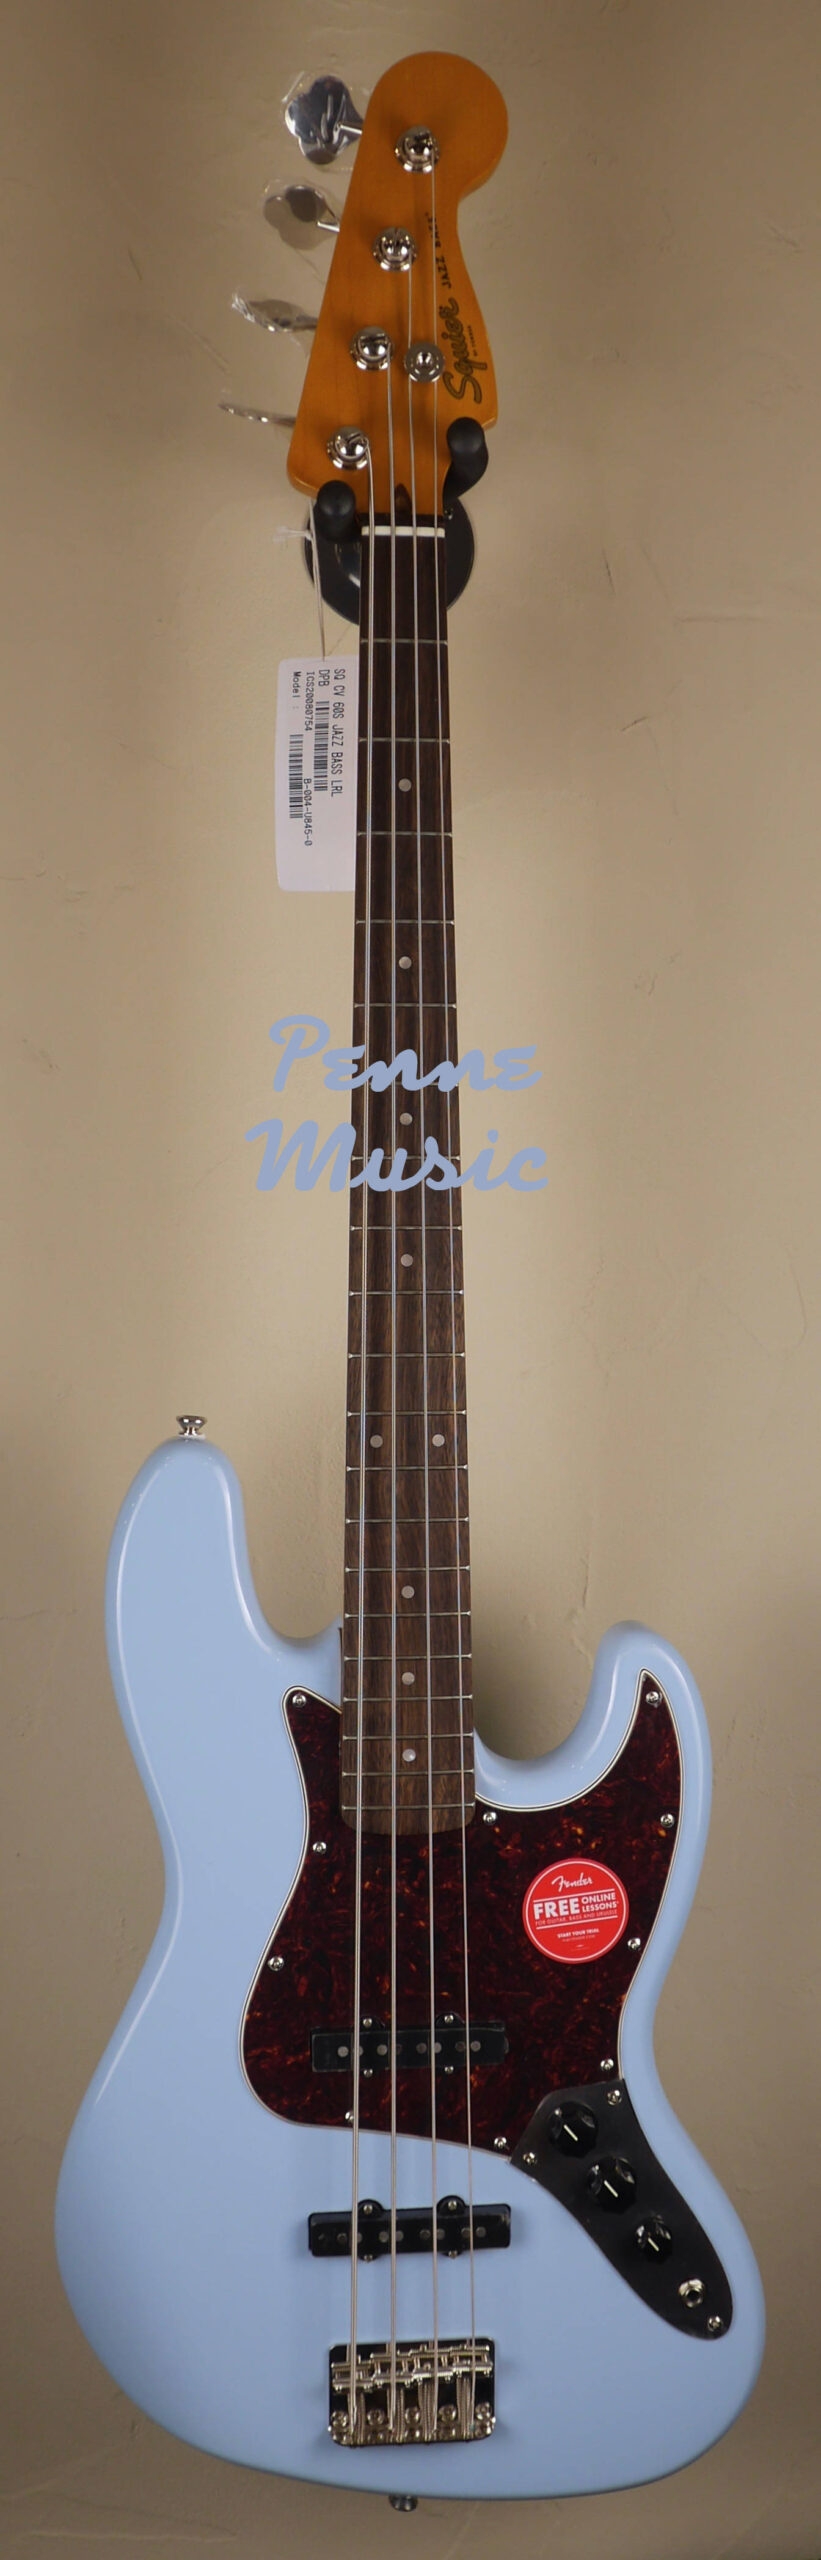 Squier by Fender Classic Vibe 60 Jazz Bass Daphne Blue 1